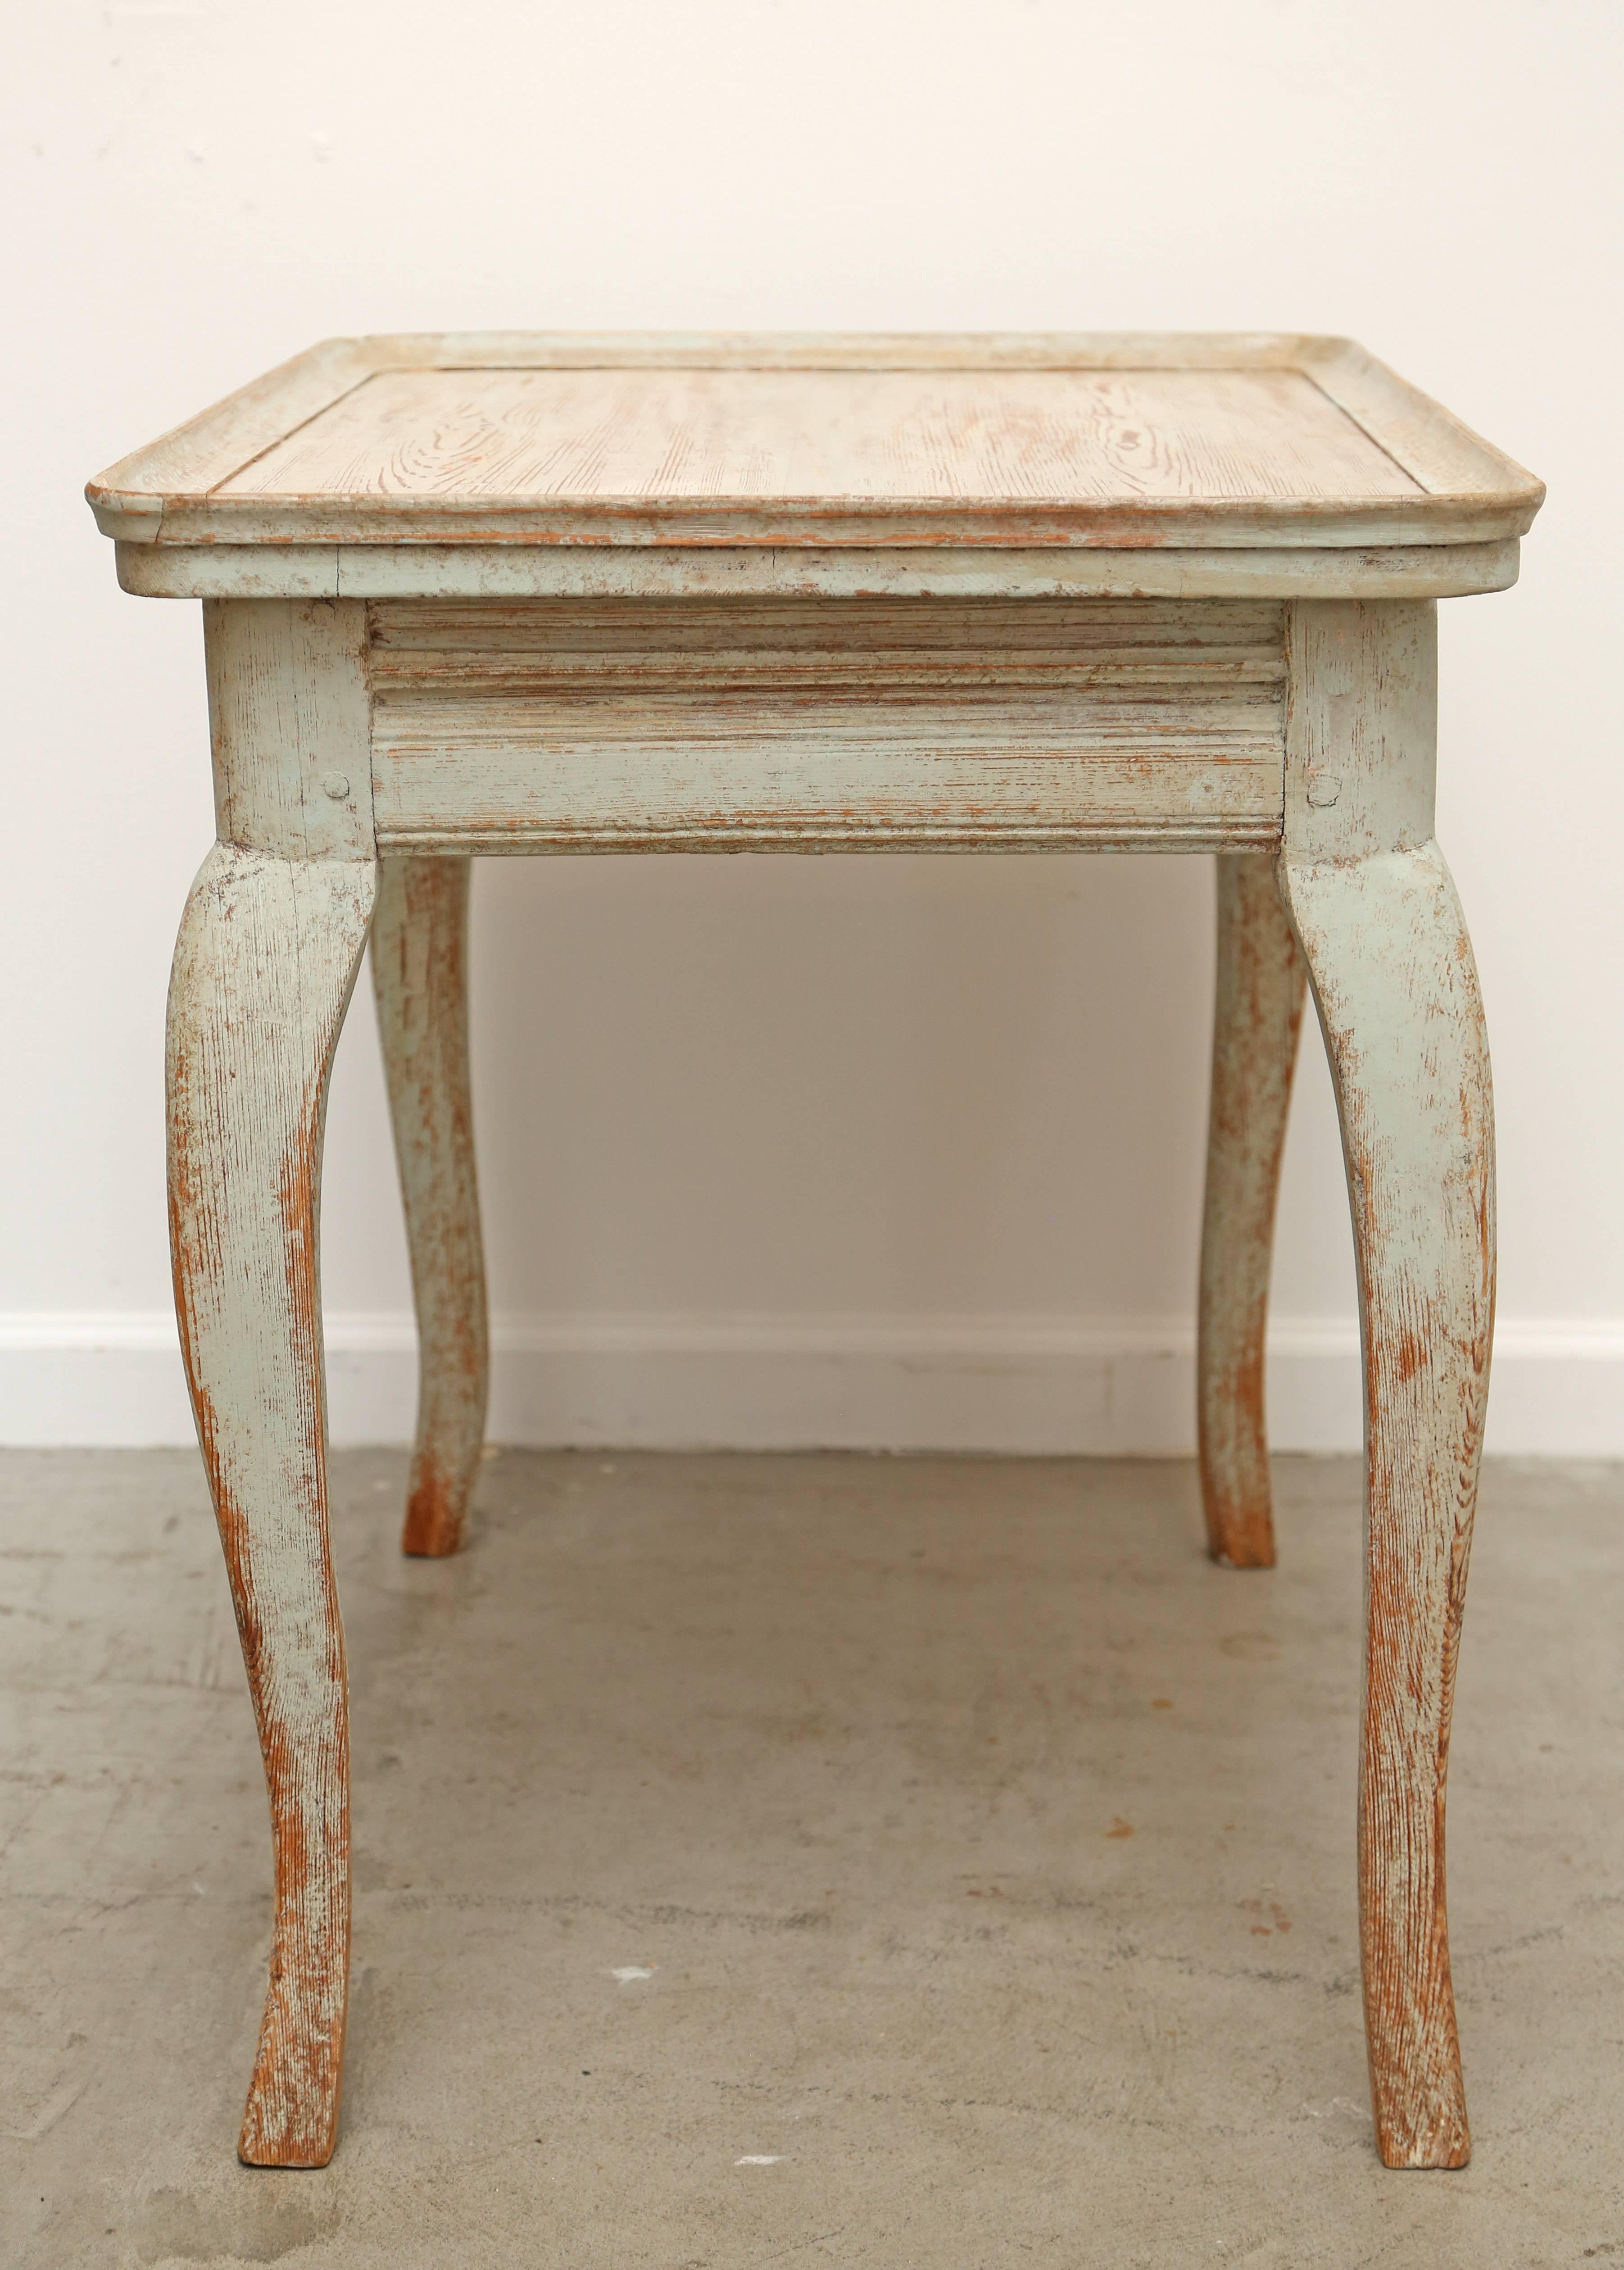 Wood Antique Swedish Baroque Painted Table, Late 18th Century For Sale